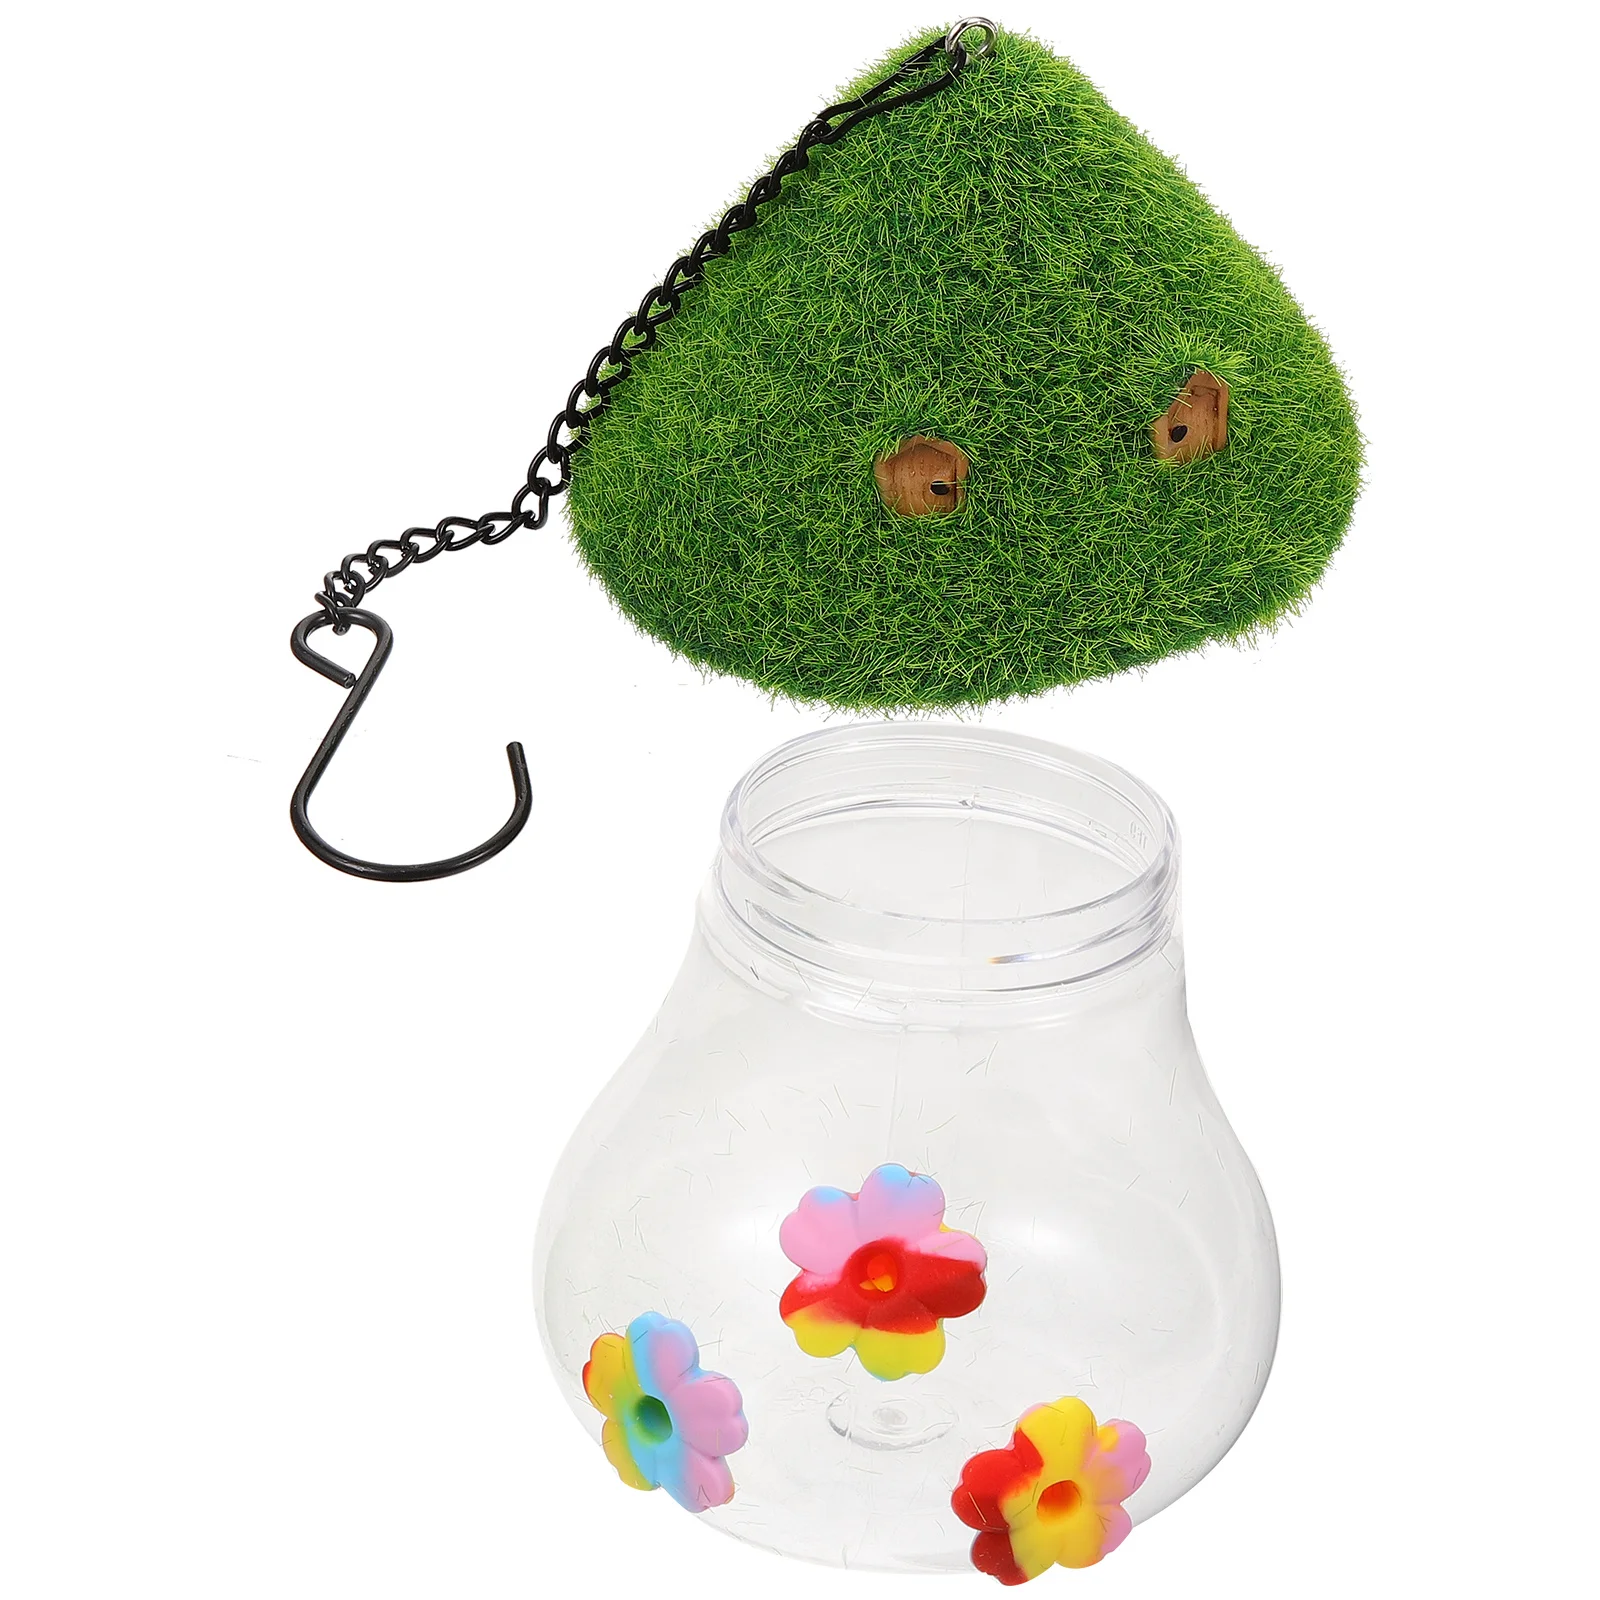 

Hummingbird Water Feeder Adorable Small Outdoor Feeders Parts Hanging Pp Tree Mini